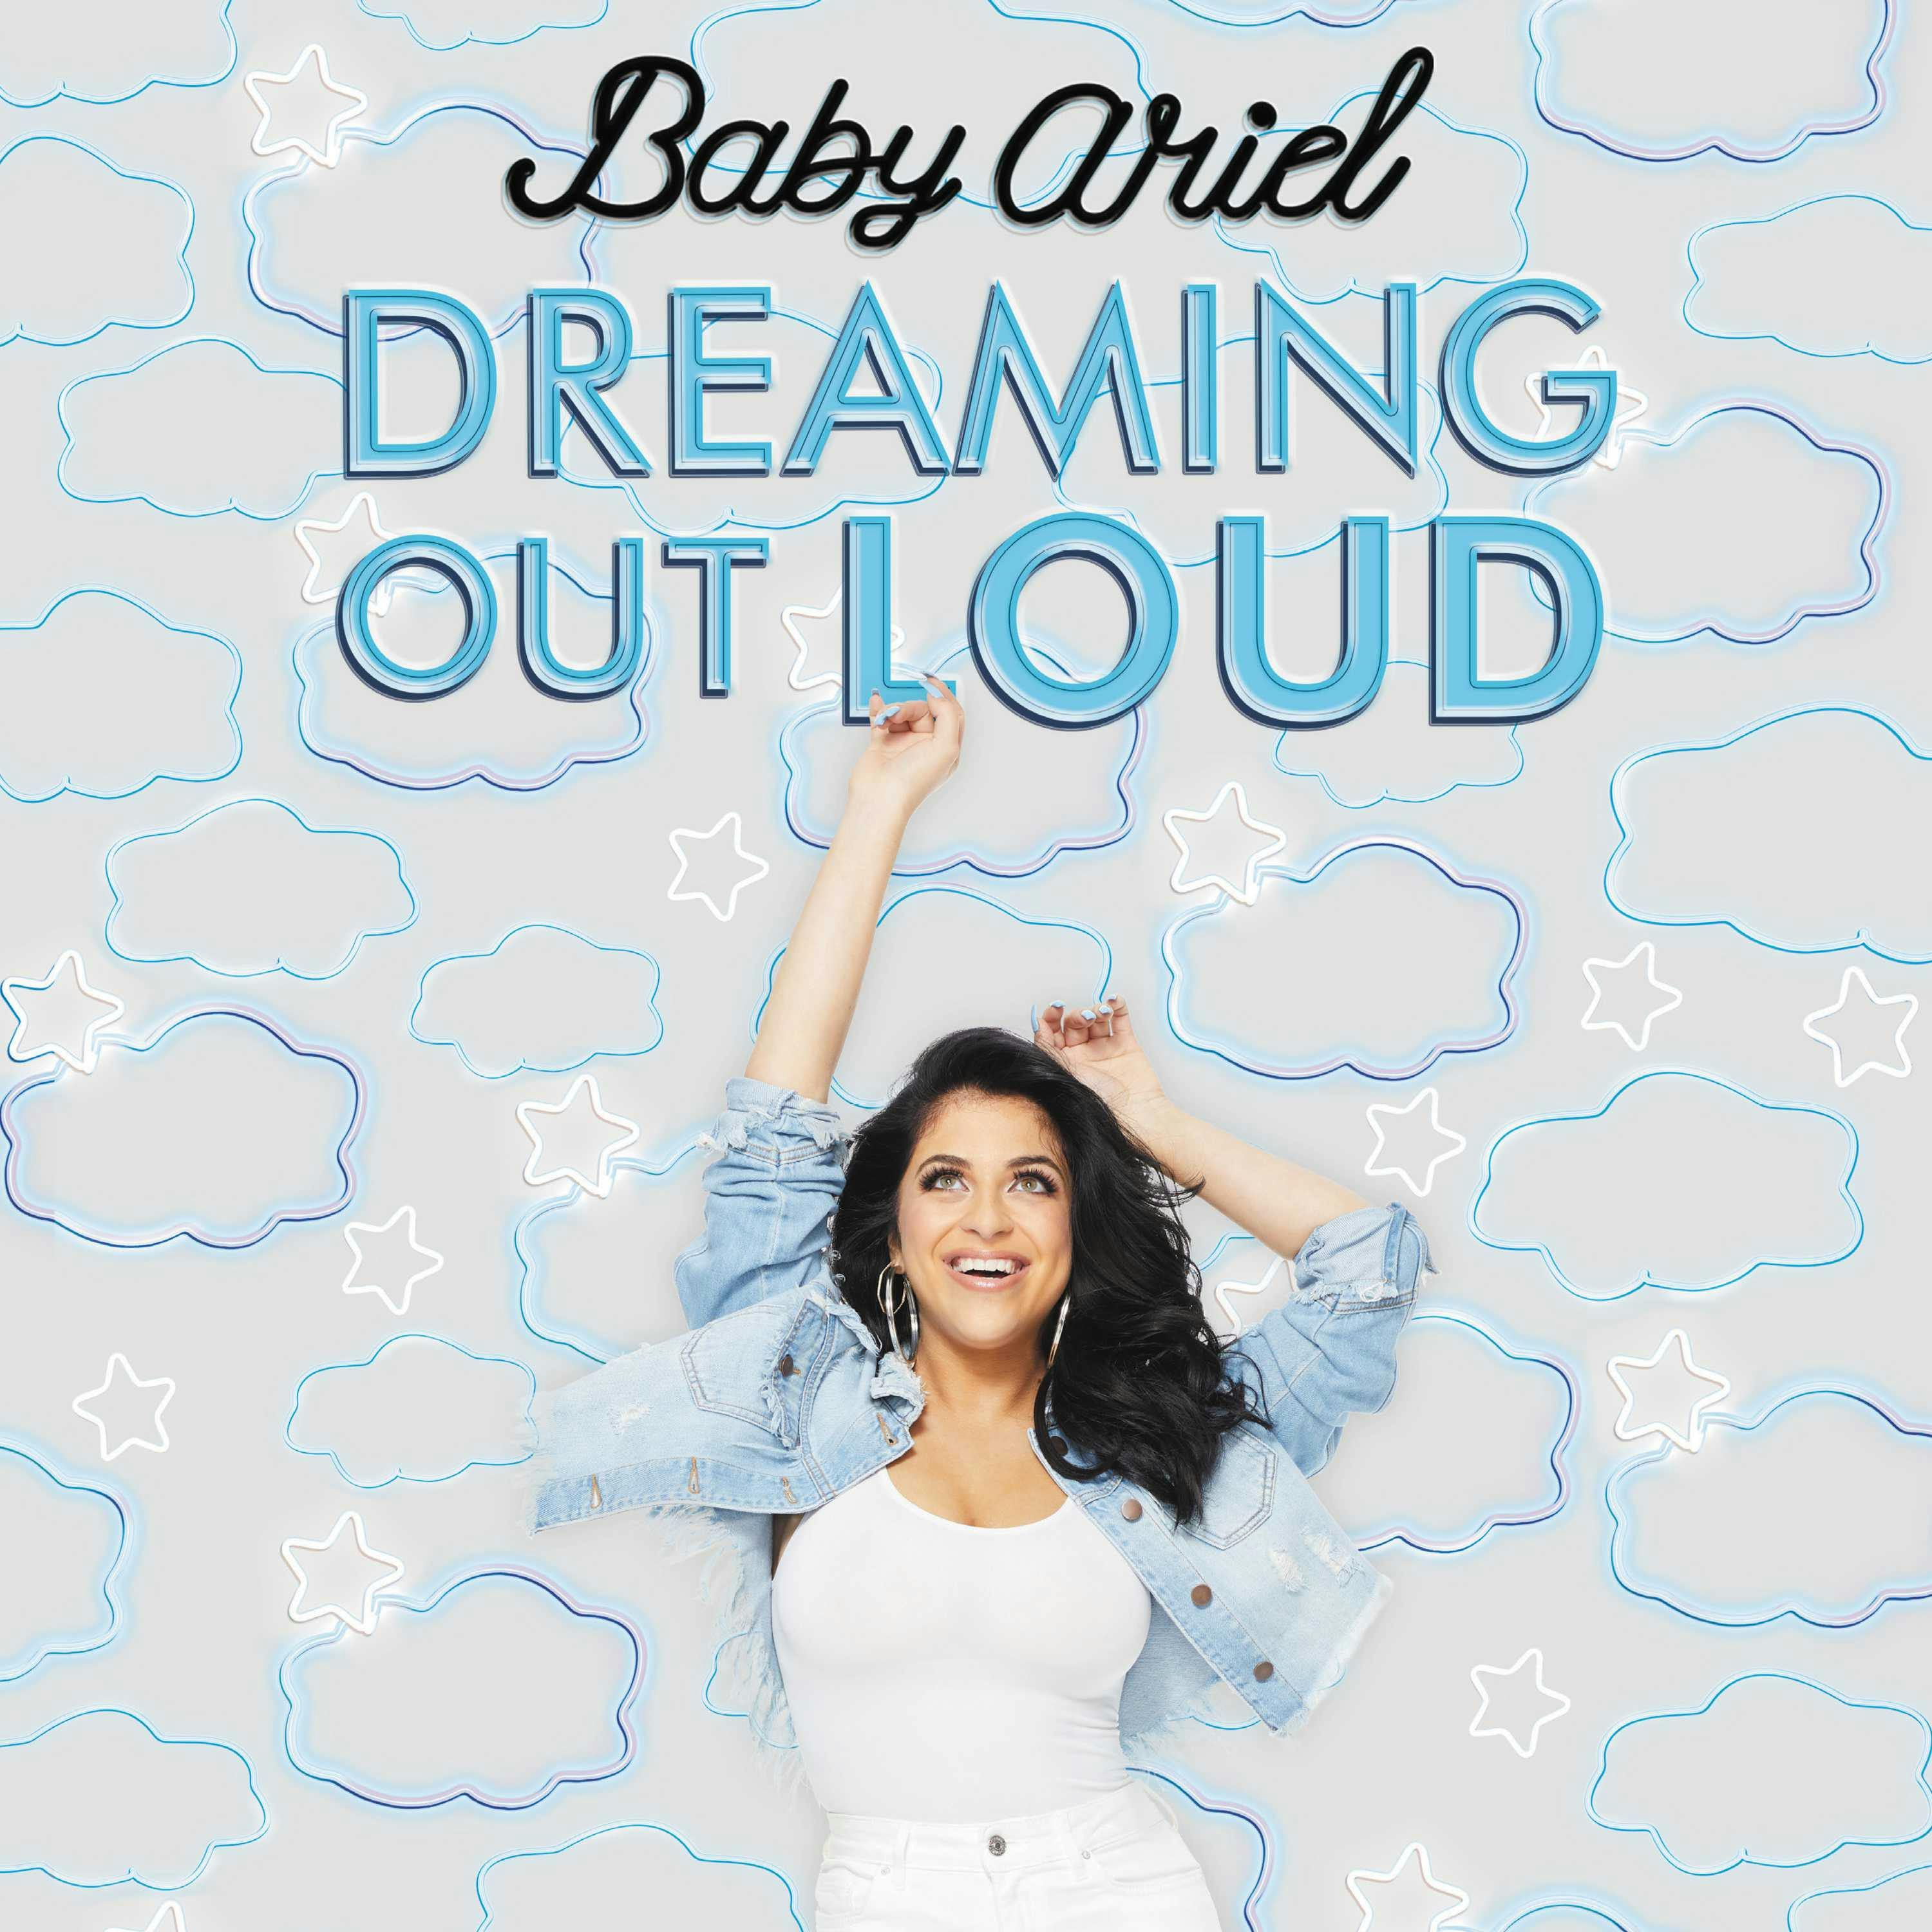 Dreaming Out Loud - Baby Ariel Baby Ariel